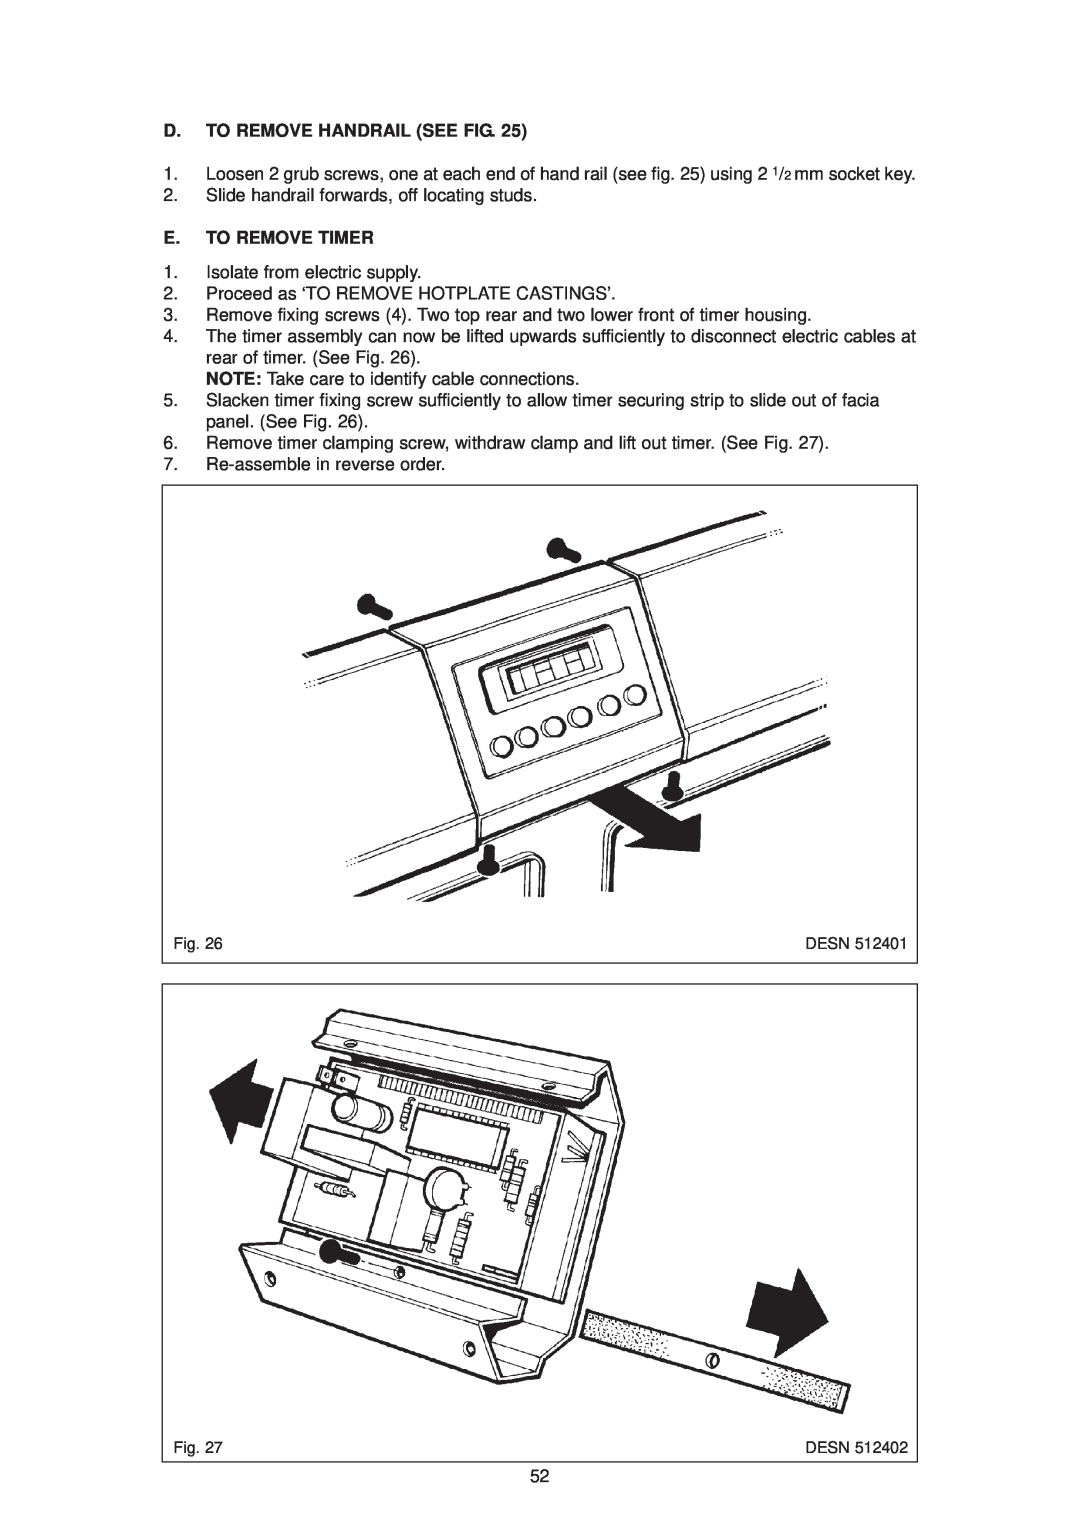 Aga Ranges dc6 owner manual D. To Remove Handrail See Fig, E. To Remove Timer 